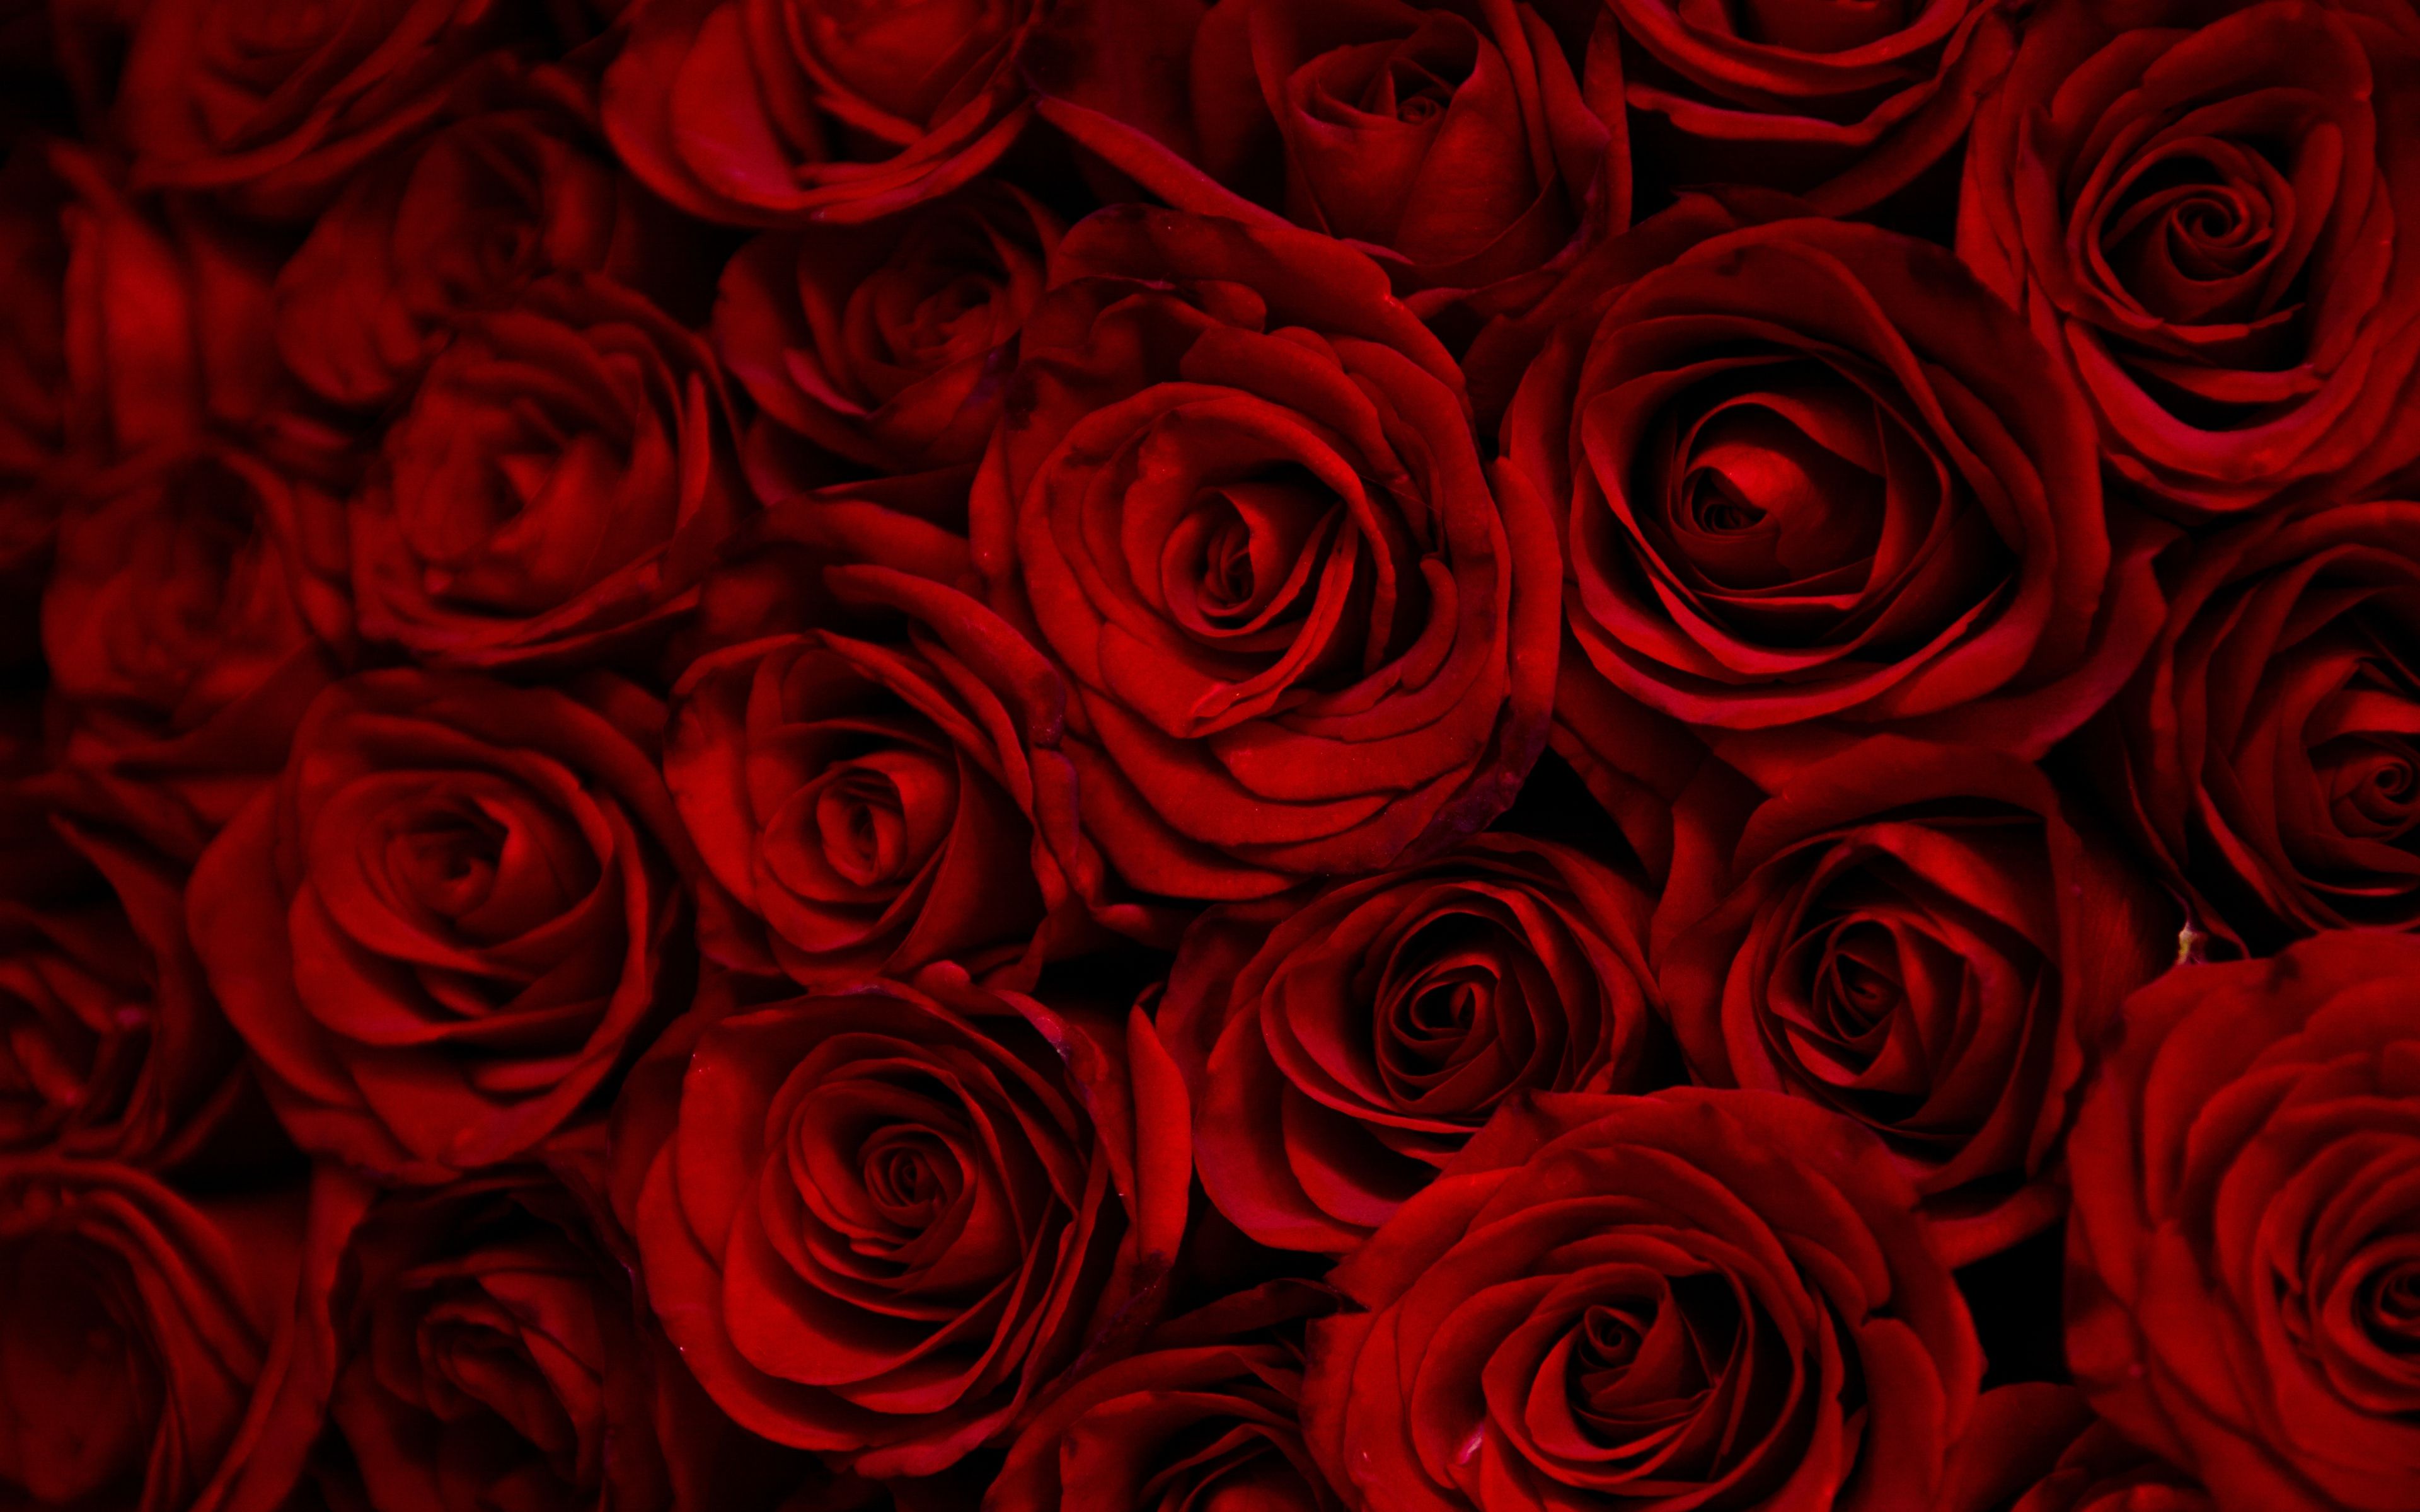 Download 3840x2400 wallpaper dark, red roses, decorative, 4k, ultra HD 16: widescreen, 3840x2400 HD image, background, 9700